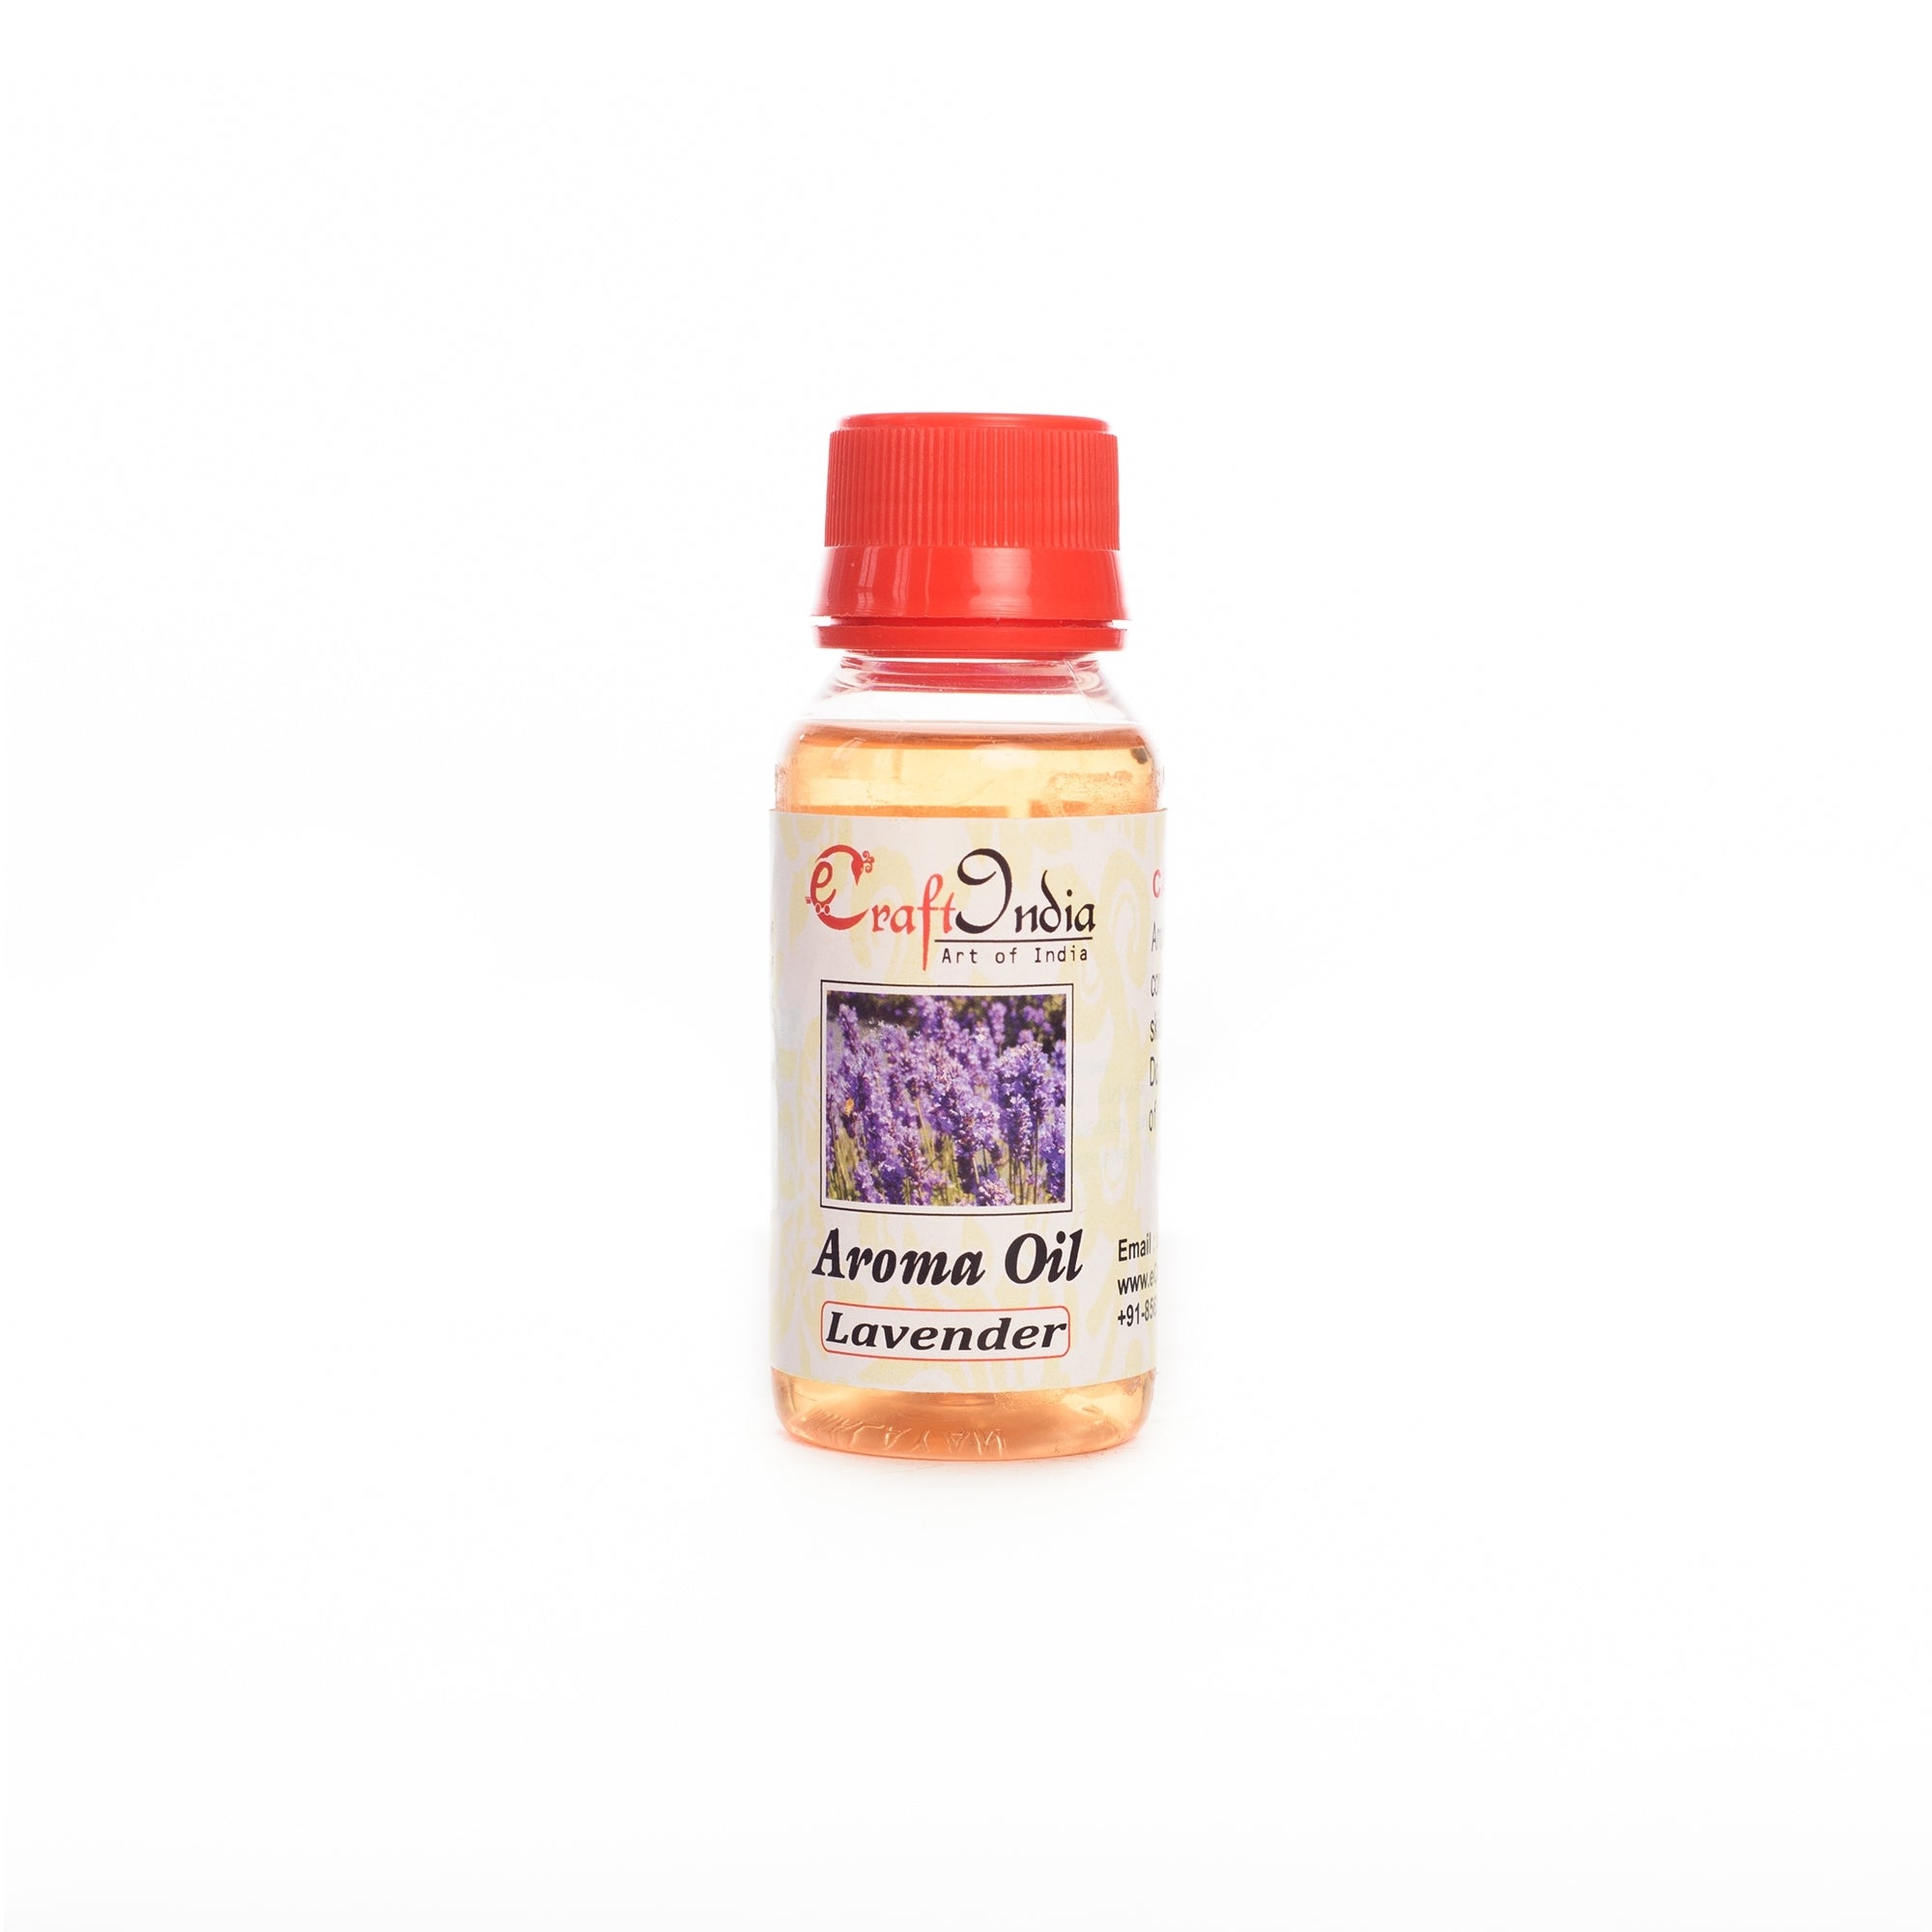 60ML High Quality Aroma Oil with Lavender Fragnance